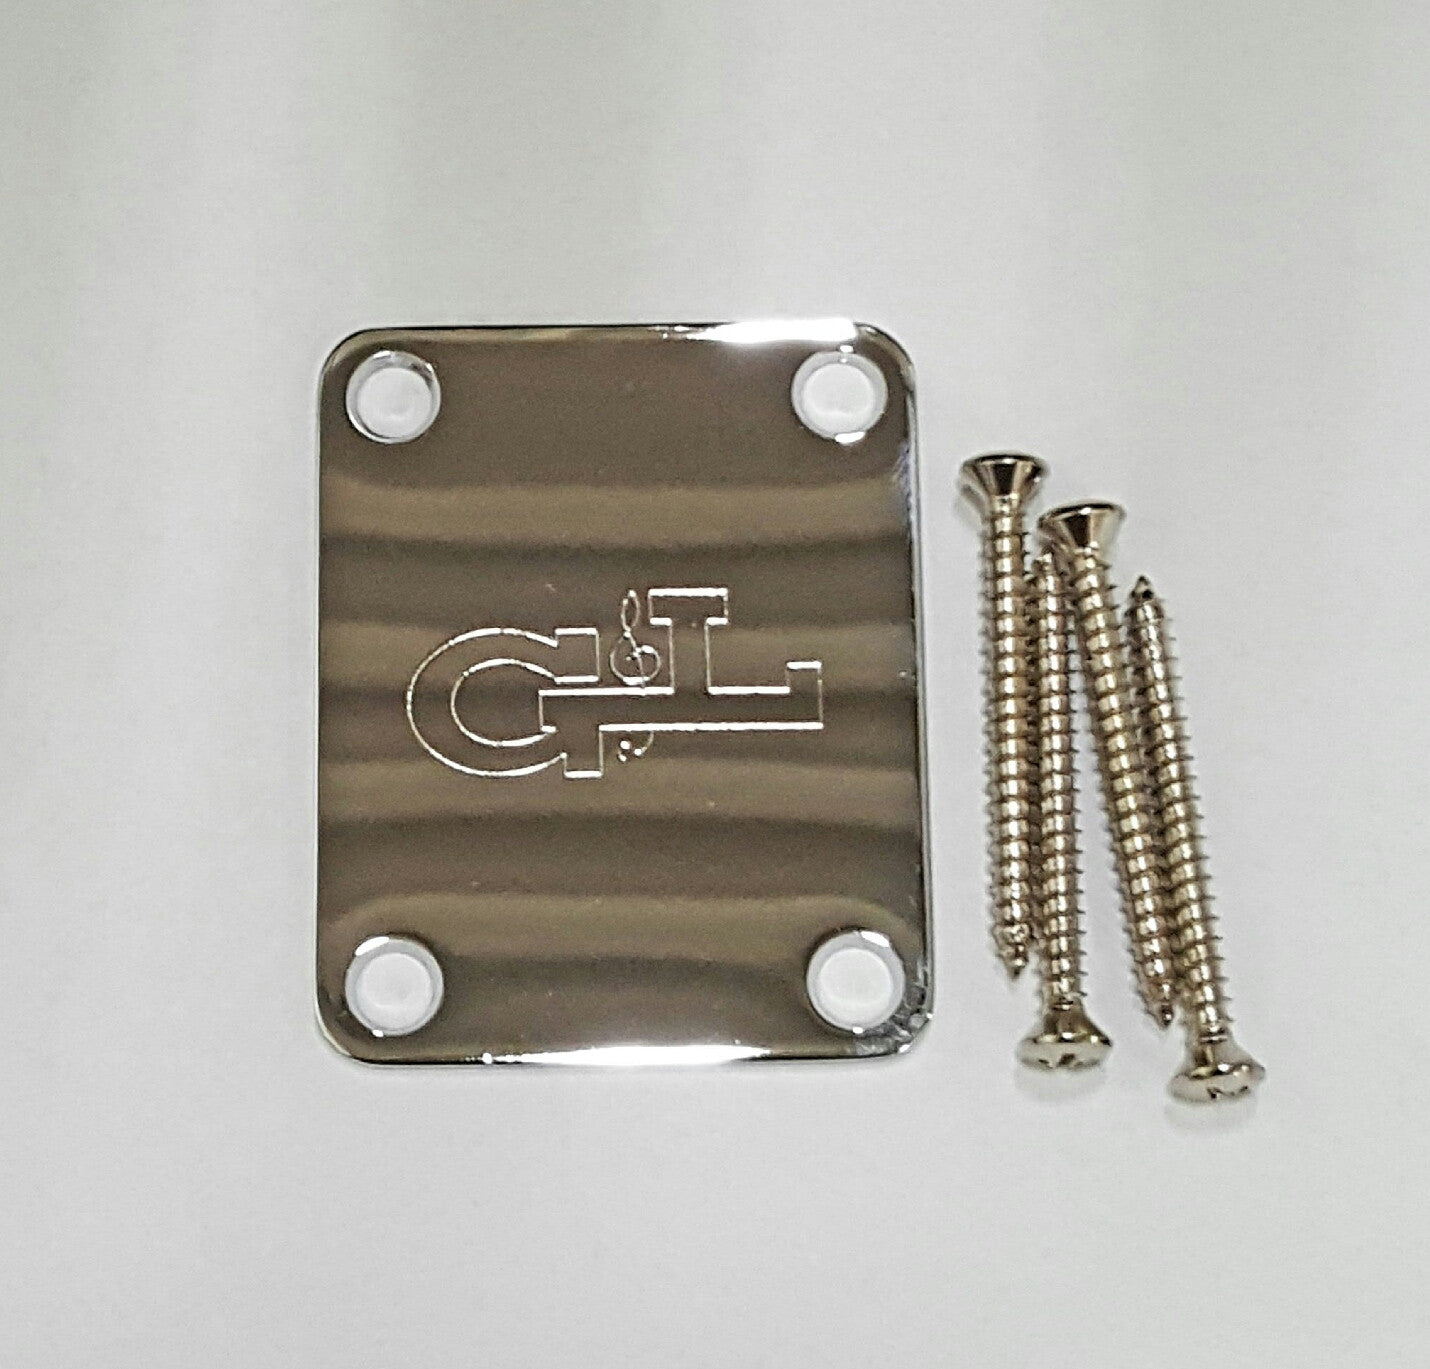 G&L Guitar Neck Plate with 4 Screws